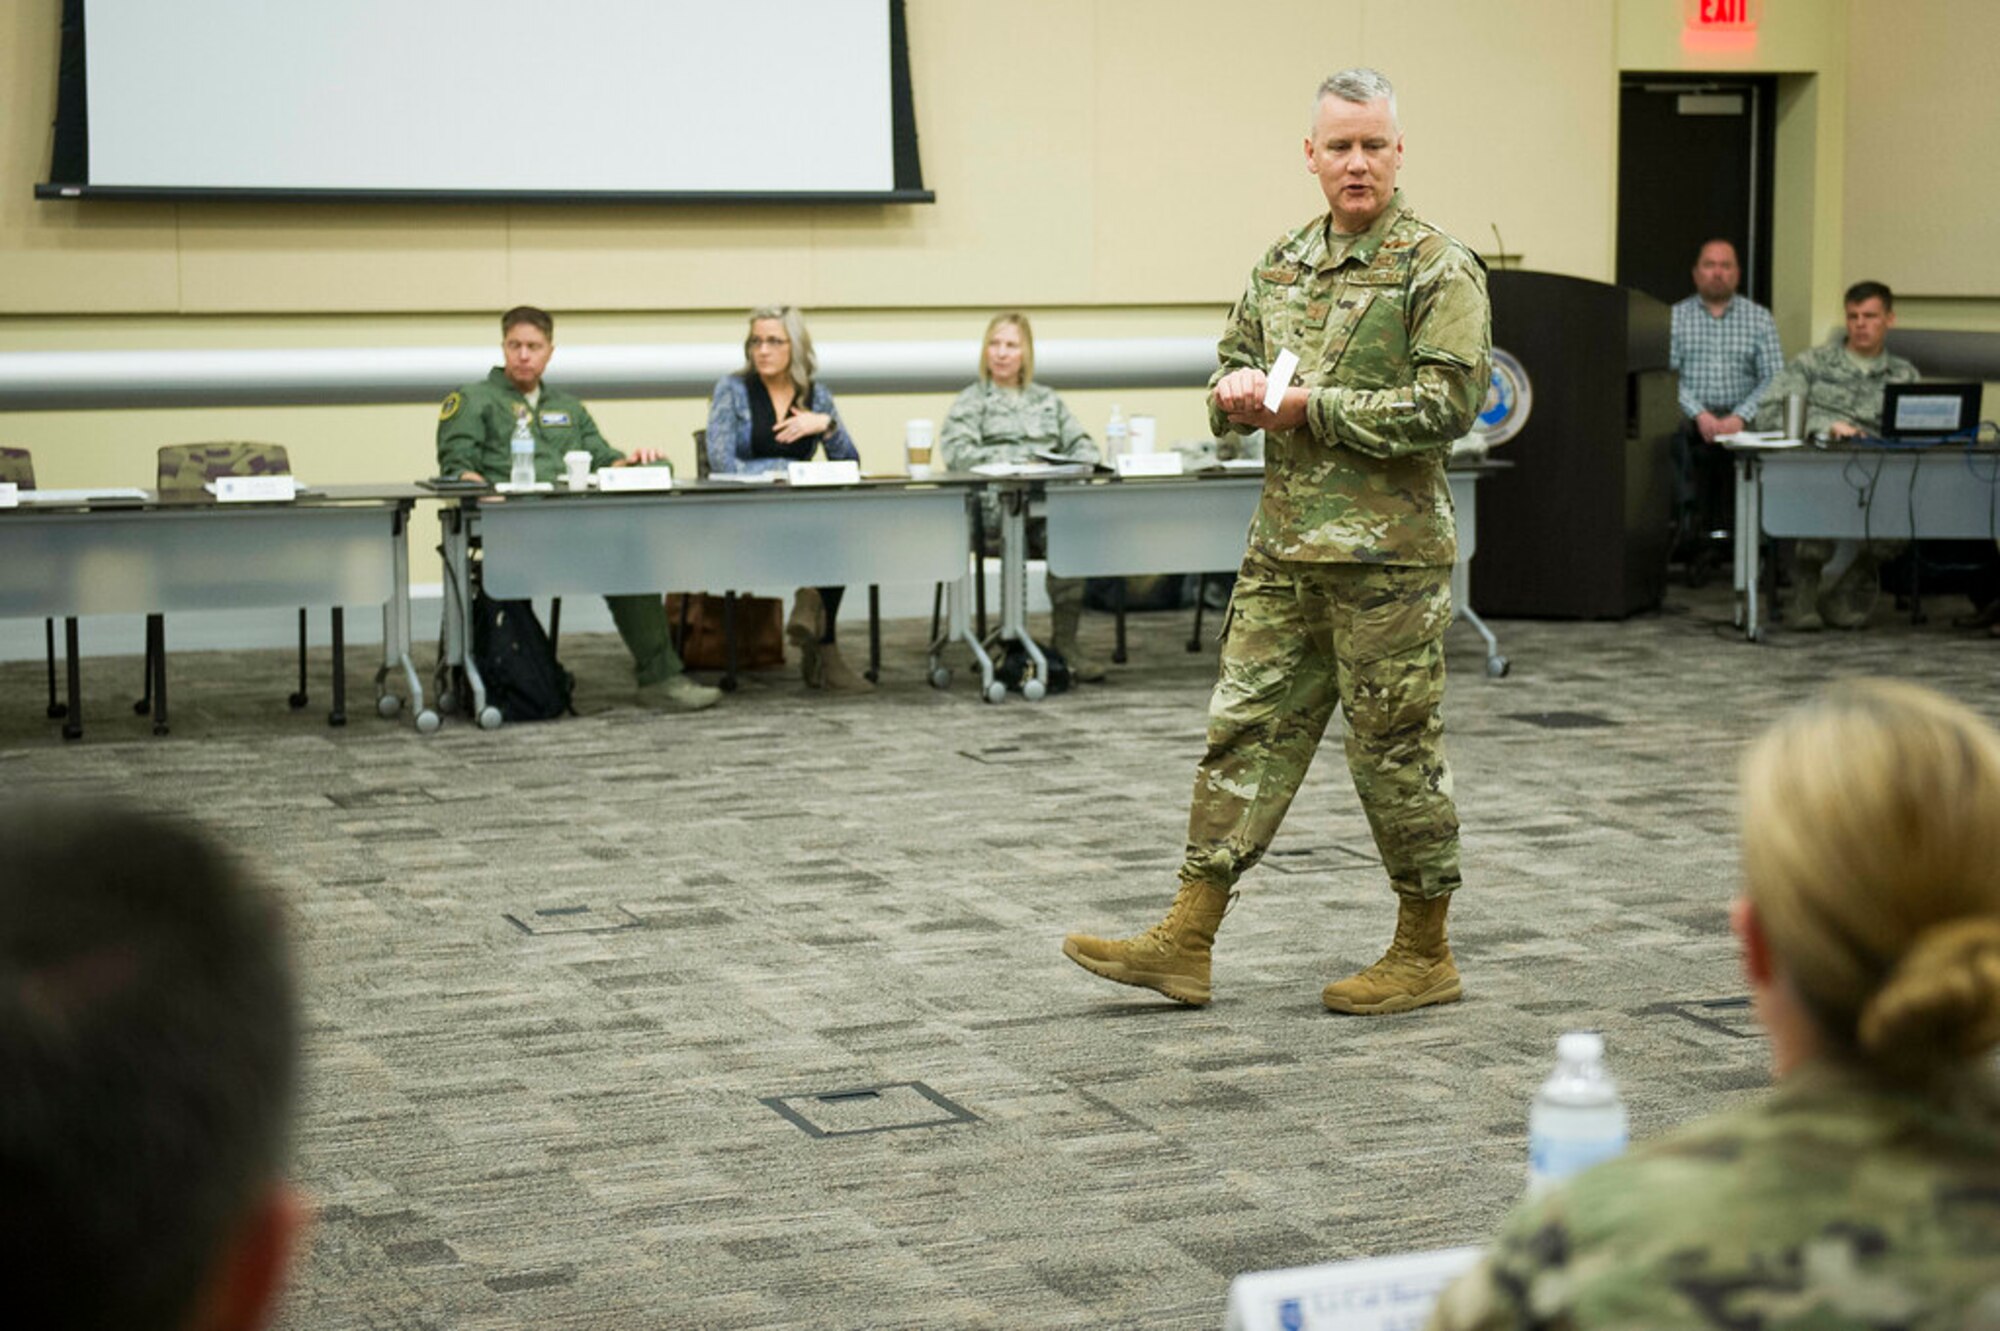 Maj. Gen. James A. Jacobson, Air Force District of Washington commander, speaks to newly selected squadron commanders and spouses during the 2019 AFDW Squadron Commanders and Spouses Course at Joint Base Andrews, Maryland, April 15, 2019. (U.S. Air Force photo by Master Sgt. Michael B. Keller)